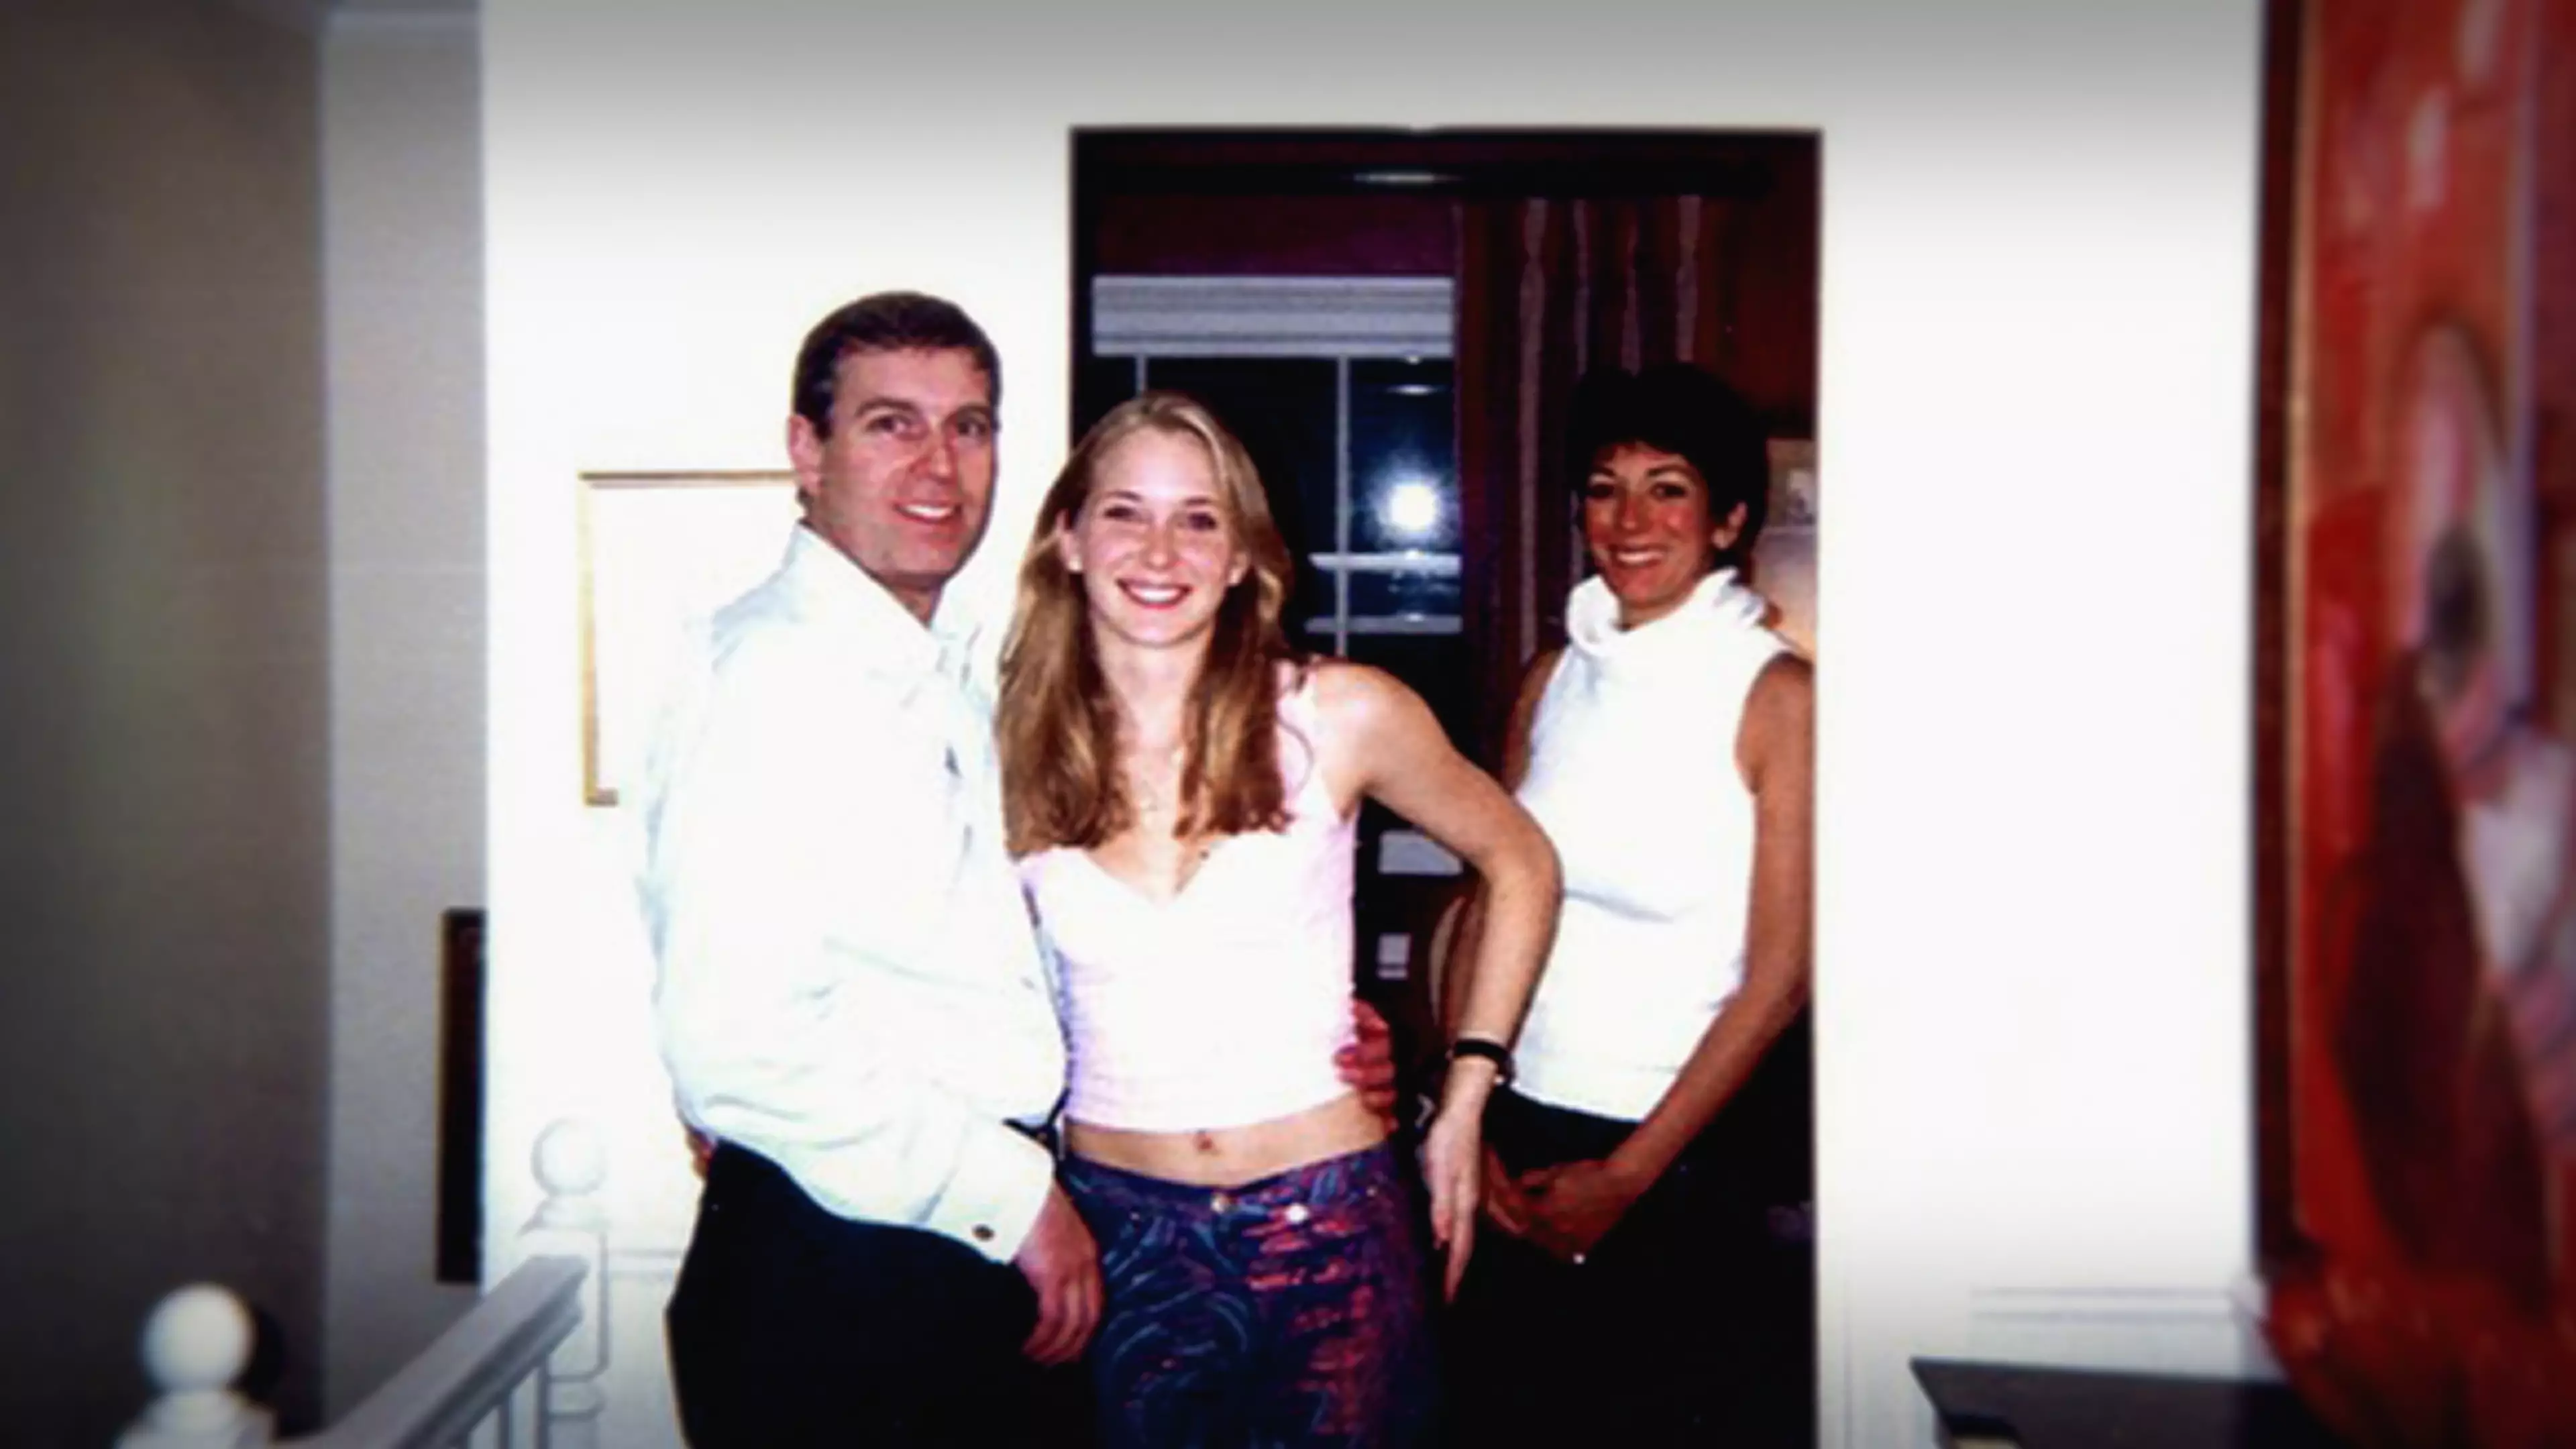 The Duke of York came under scrutiny after he was accused of sleeping with Epstein's 'sex slave' Virginia Guiffre when she was 17. He has said he has 'no recollection' of this photo being taken (